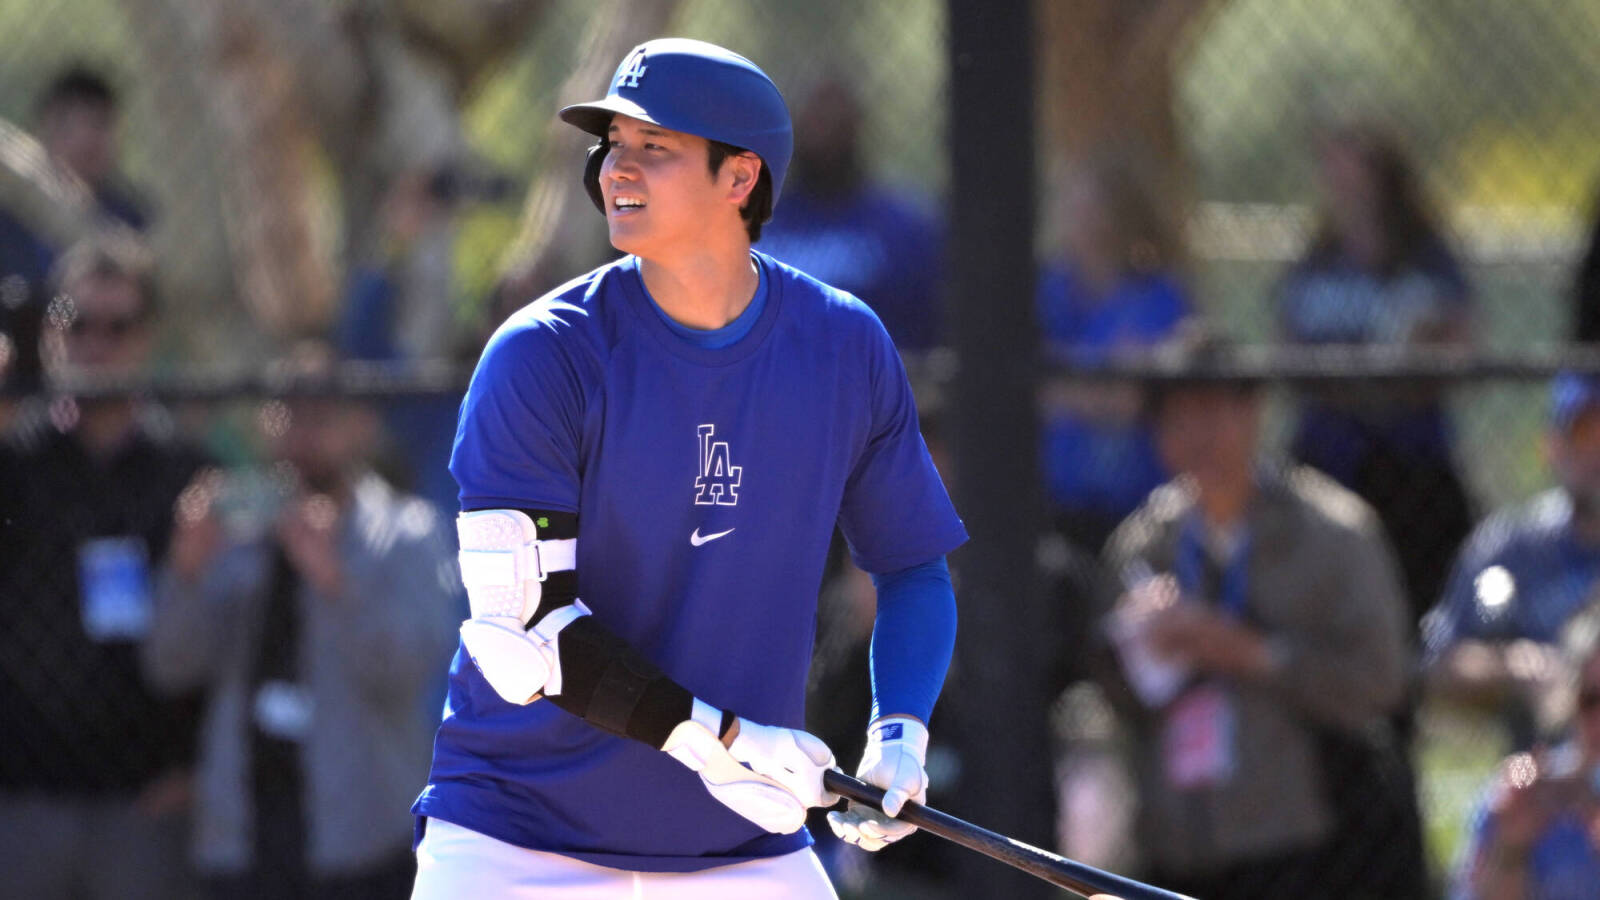 We’re about to officially see Shohei Ohtani and Yoshinobu Yamamoto as Dodgers